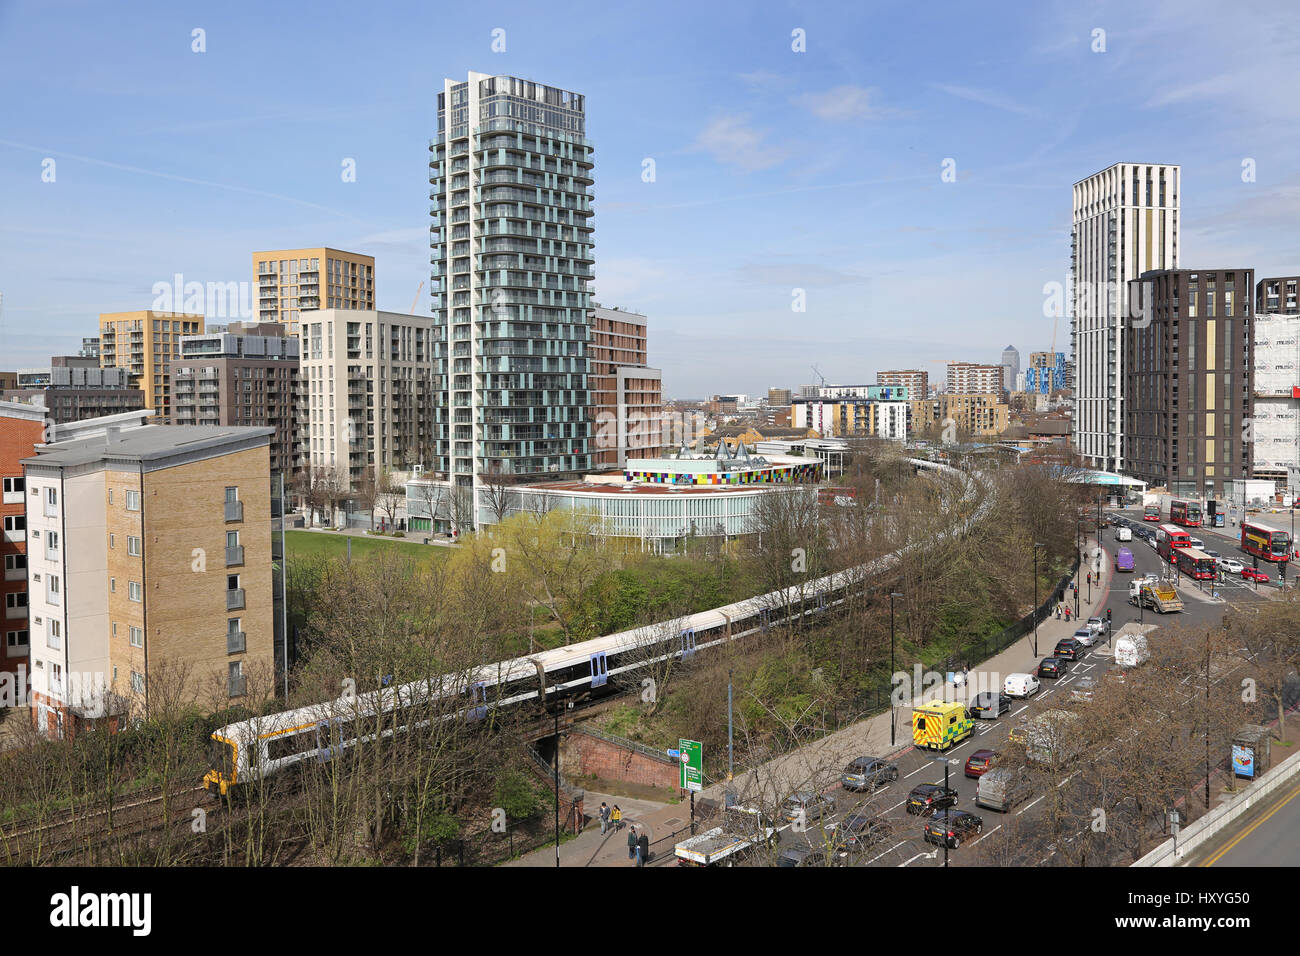 High level view of Lewisham town centre, southeast London, UK, showing new residential development, sports centre, railway and gyratory system. Stock Photo